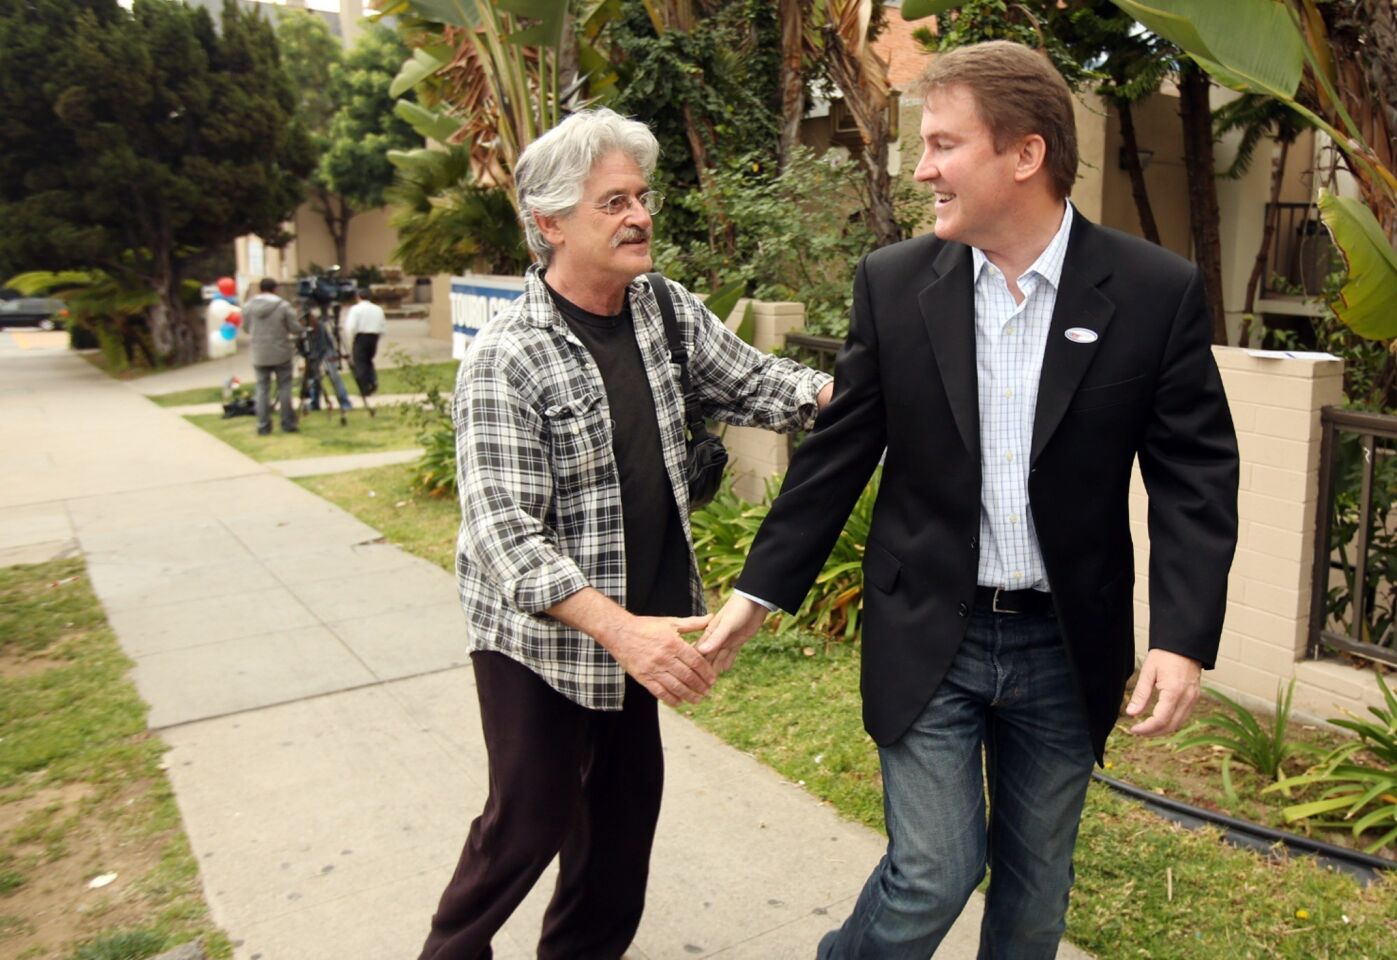 Mayoral candidate Kevin James, right, gets a handshake from Skip Haynes, a Laurel Canyon neighbor, after casting his ballot at the Hollywood Temple Beth El in West Hollywood.